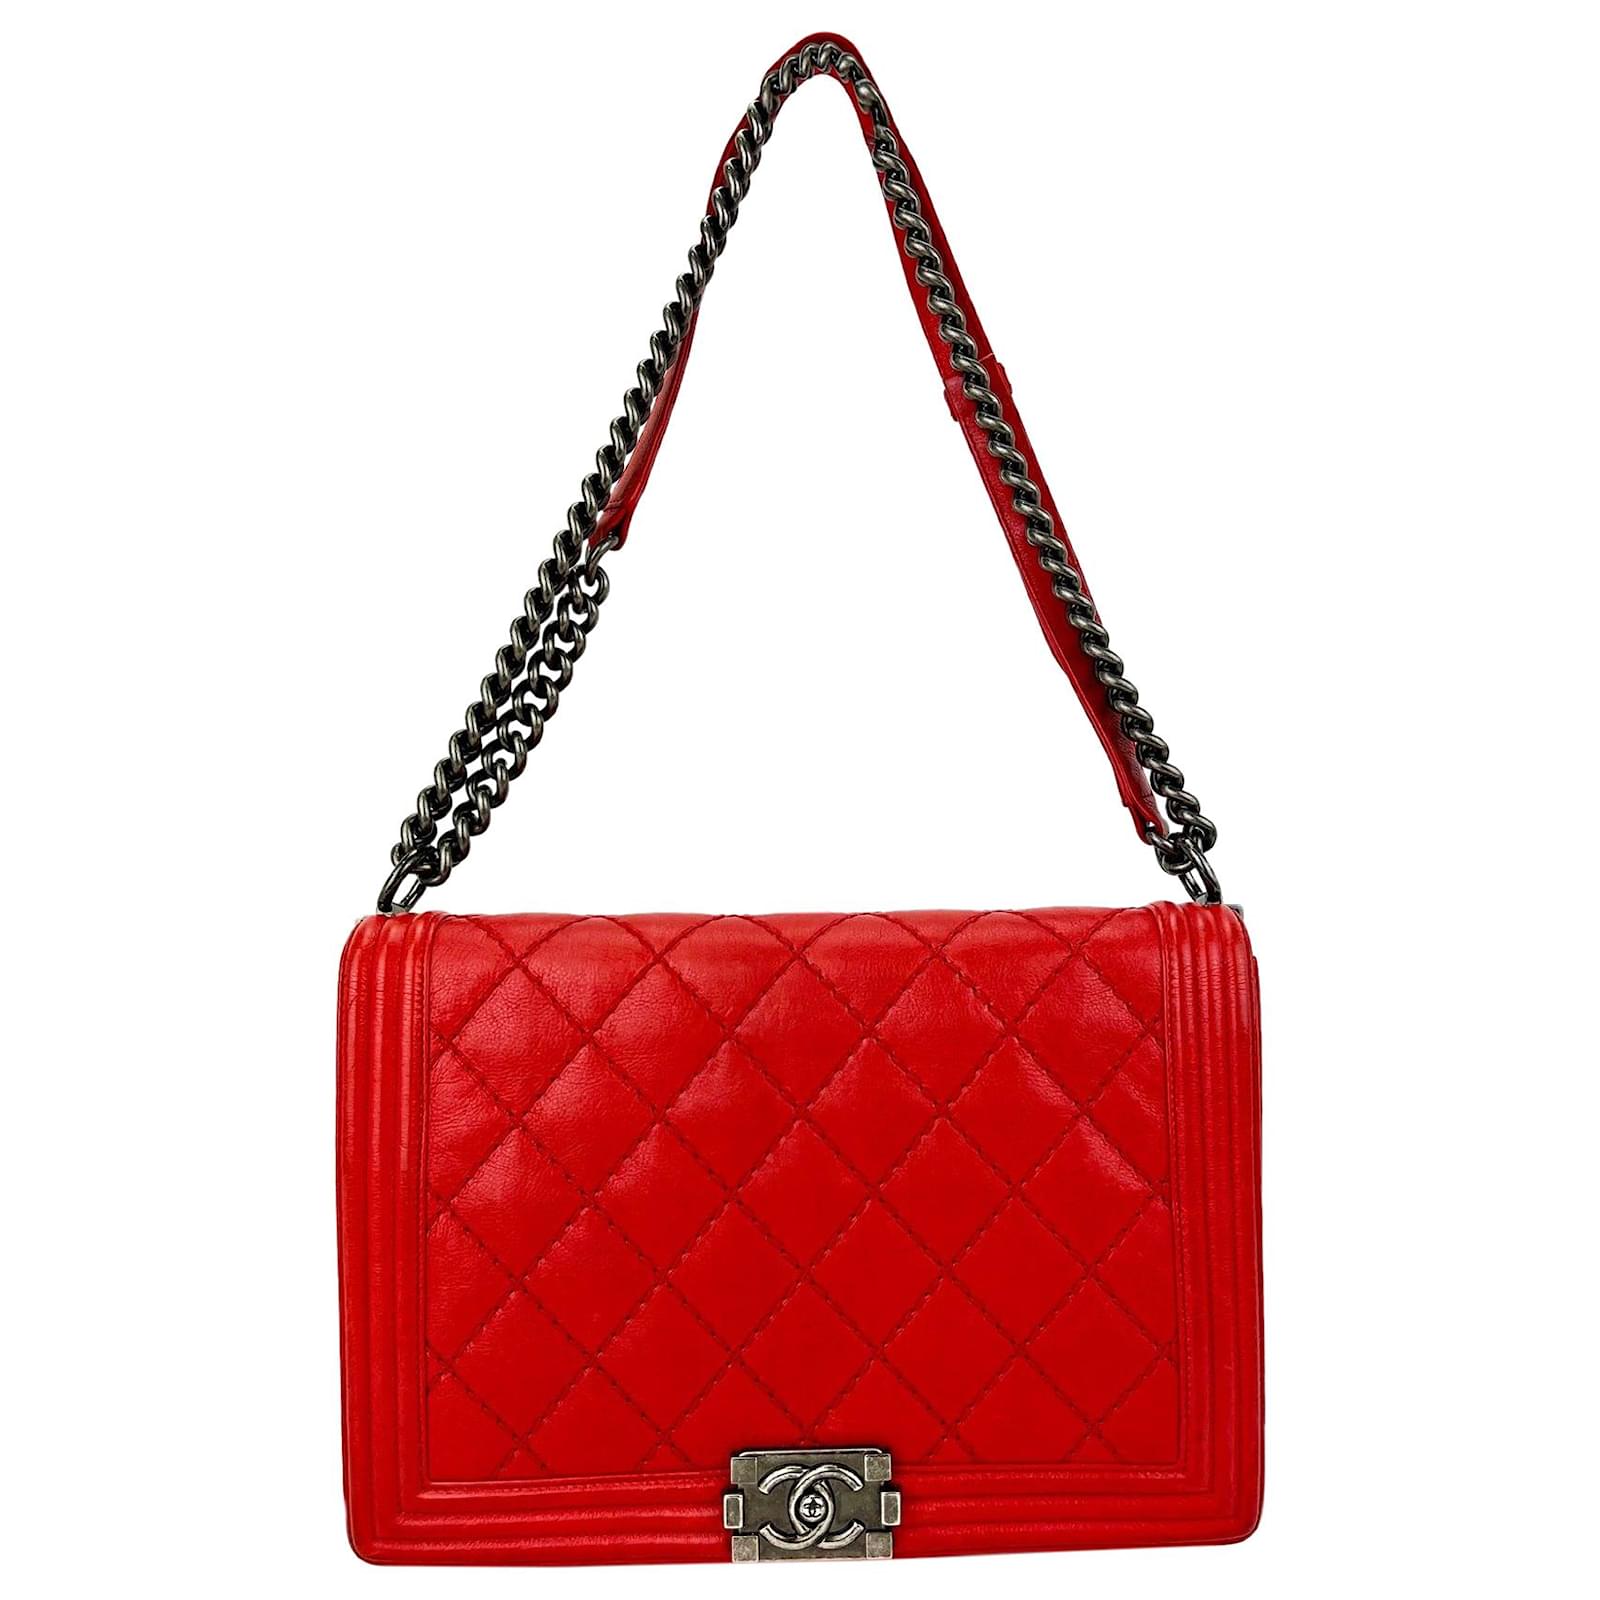 Chanel Pre-owned 2016 Timeless Maxi Jumbo Shoulder Bag - Red